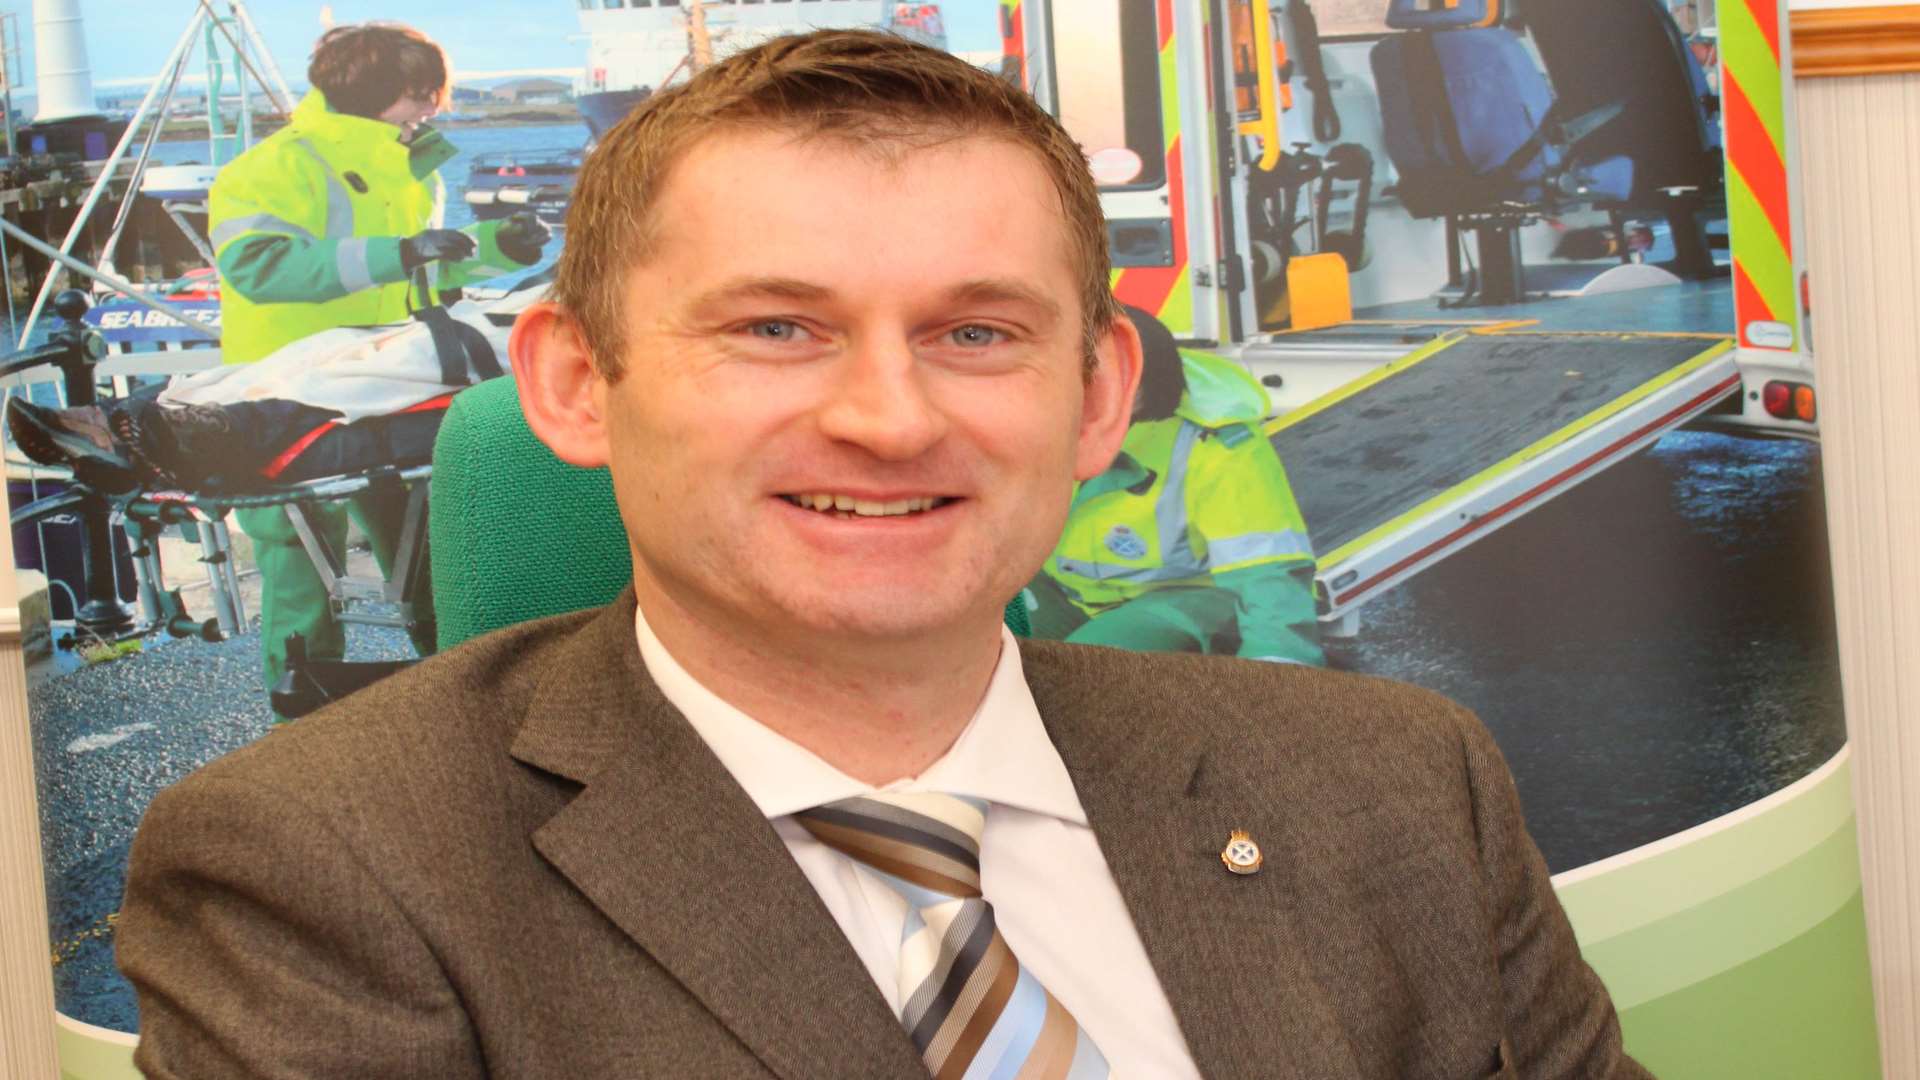 Daren Mochrie is the new chief executive of South East Coast Ambulance